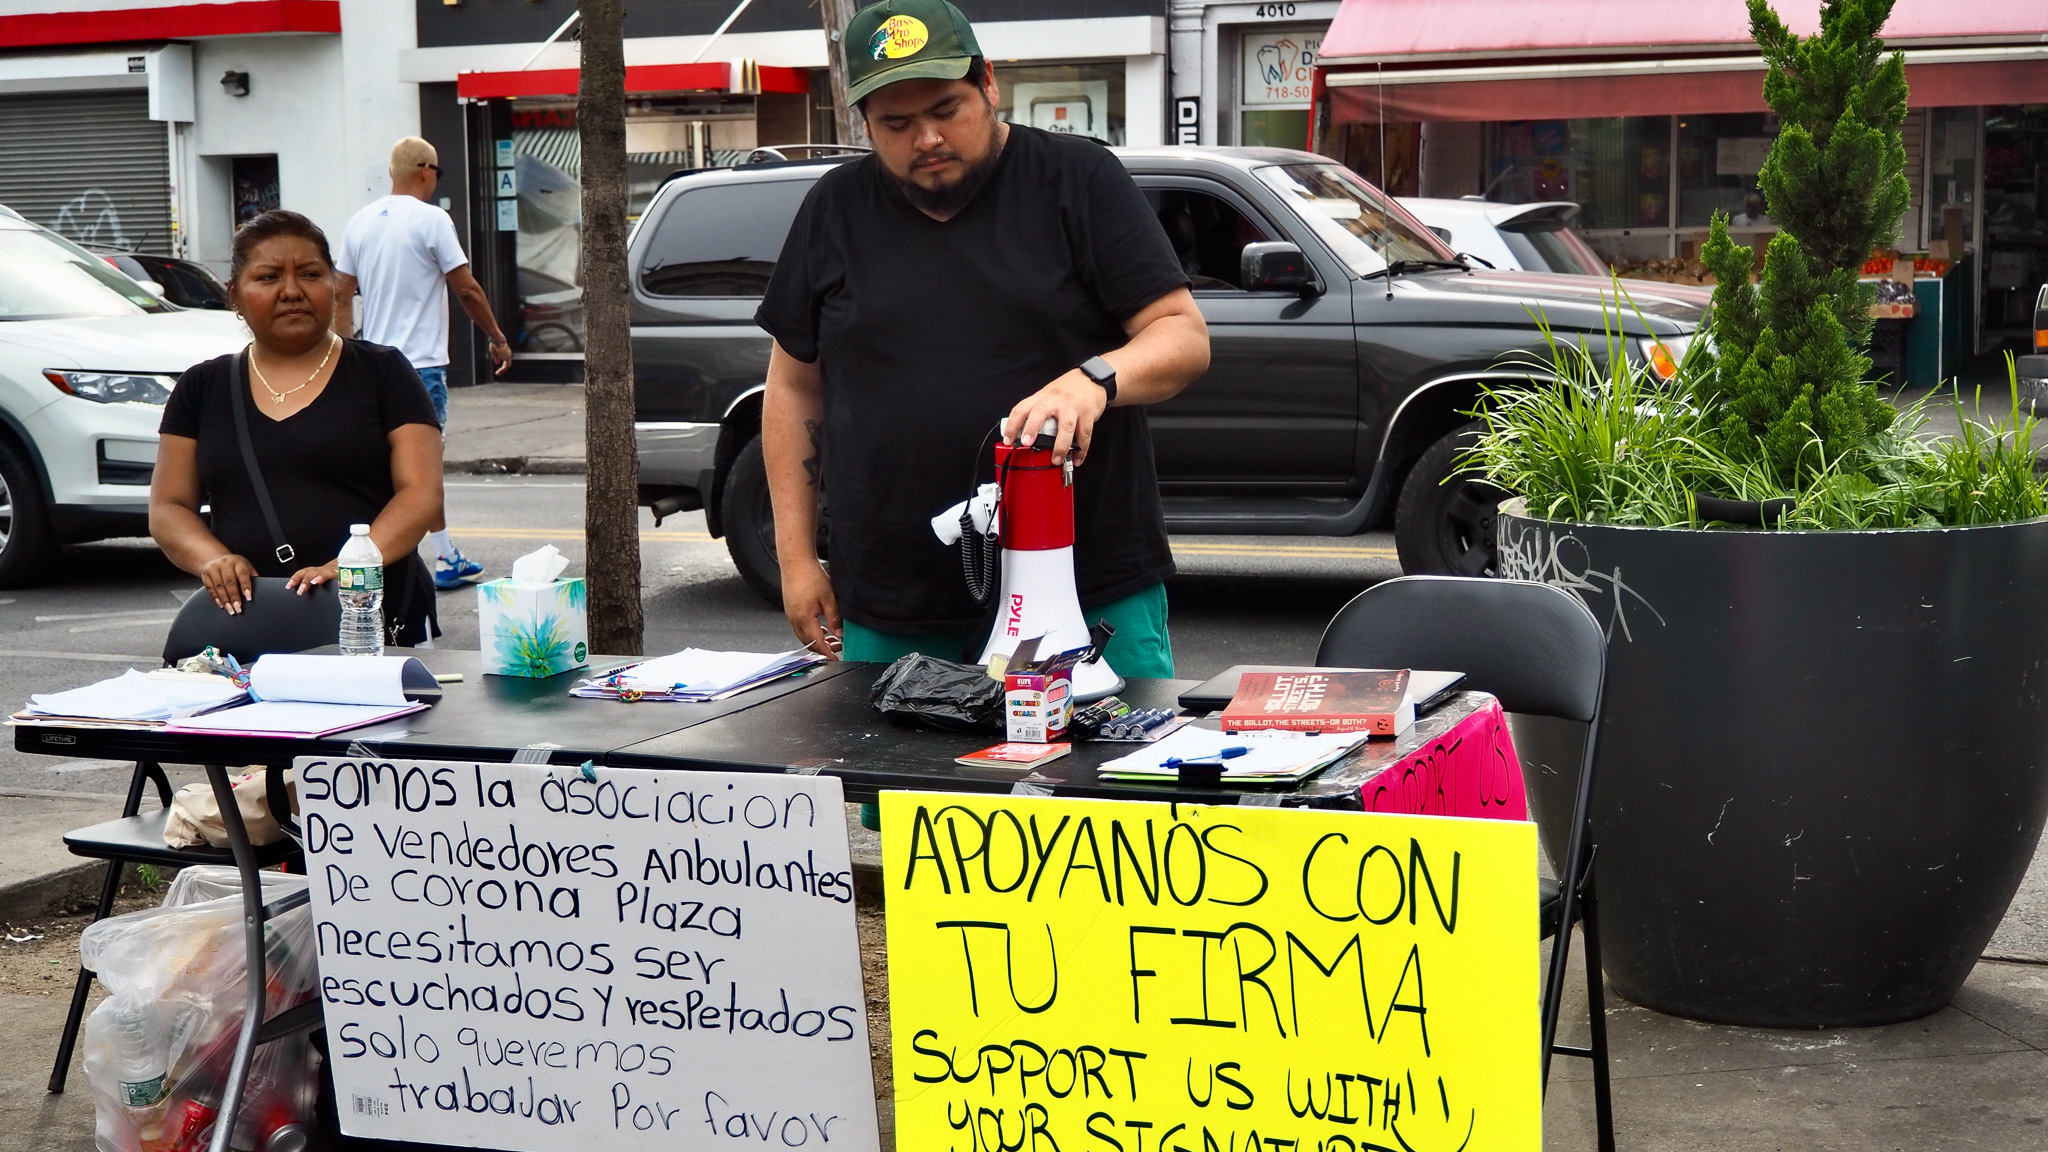 Immigration News Today: Street Vendors Fight Back as NYPD Expands Raids